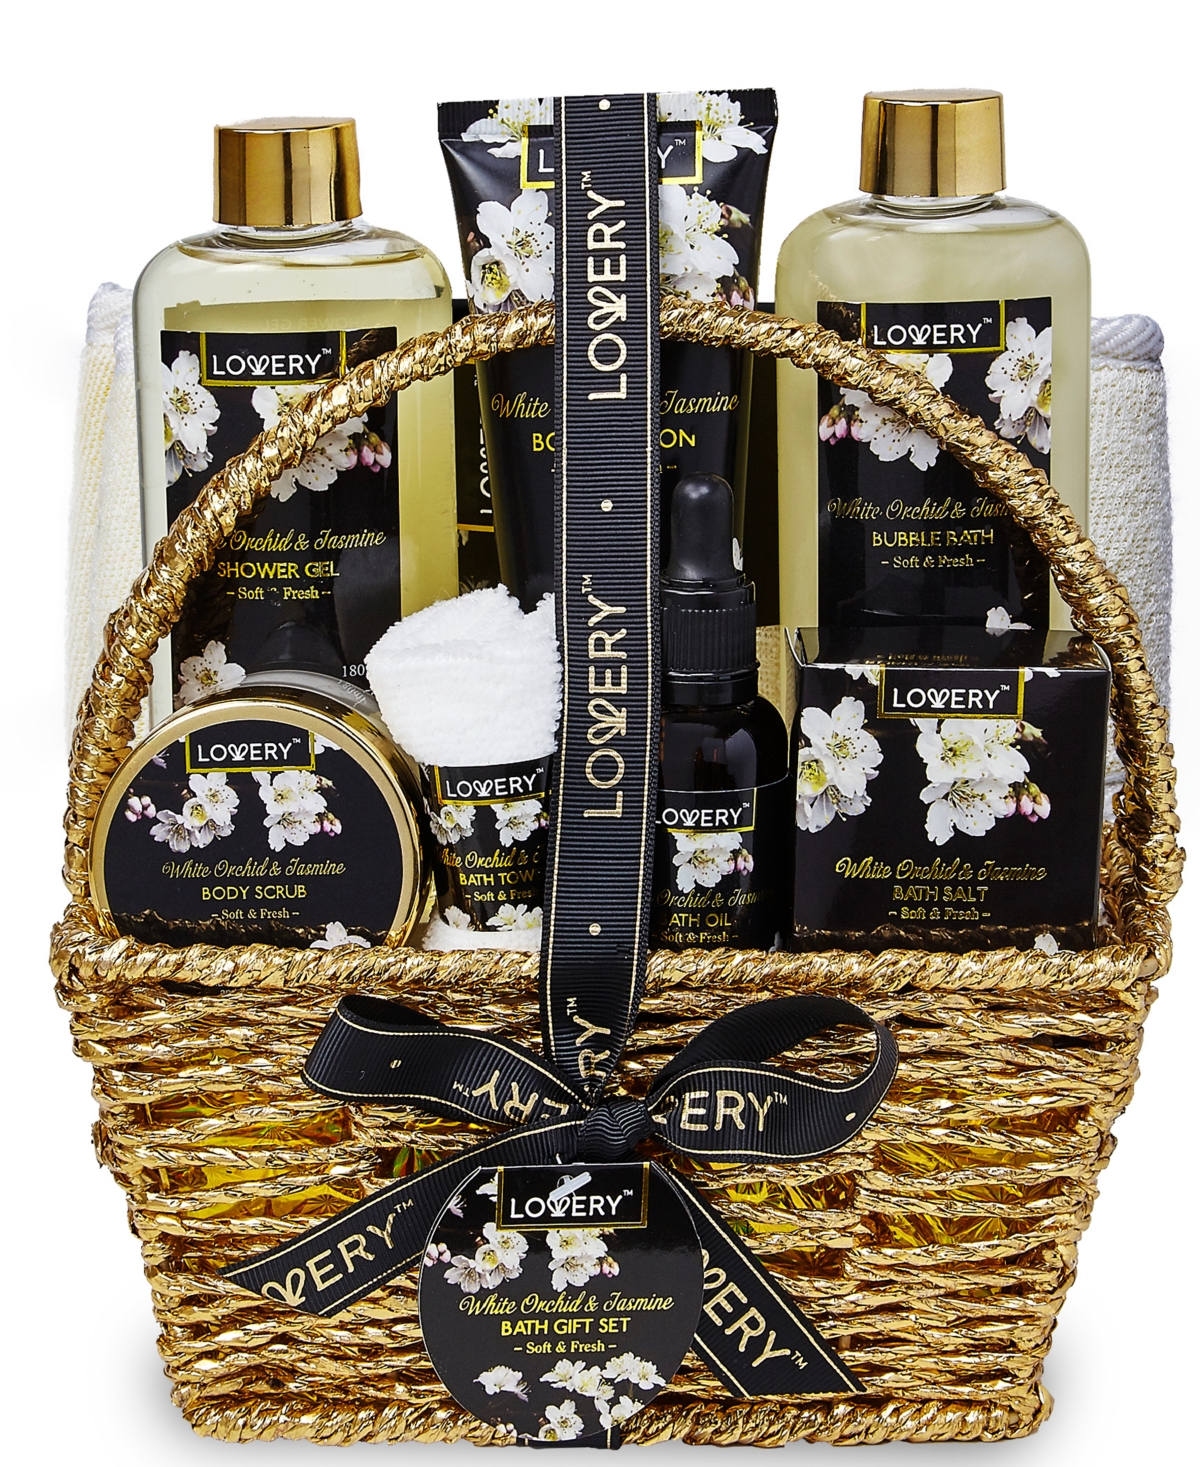 Lovery Home Spa Orchid Jasmine Body Care Gift Set, 9 Piece